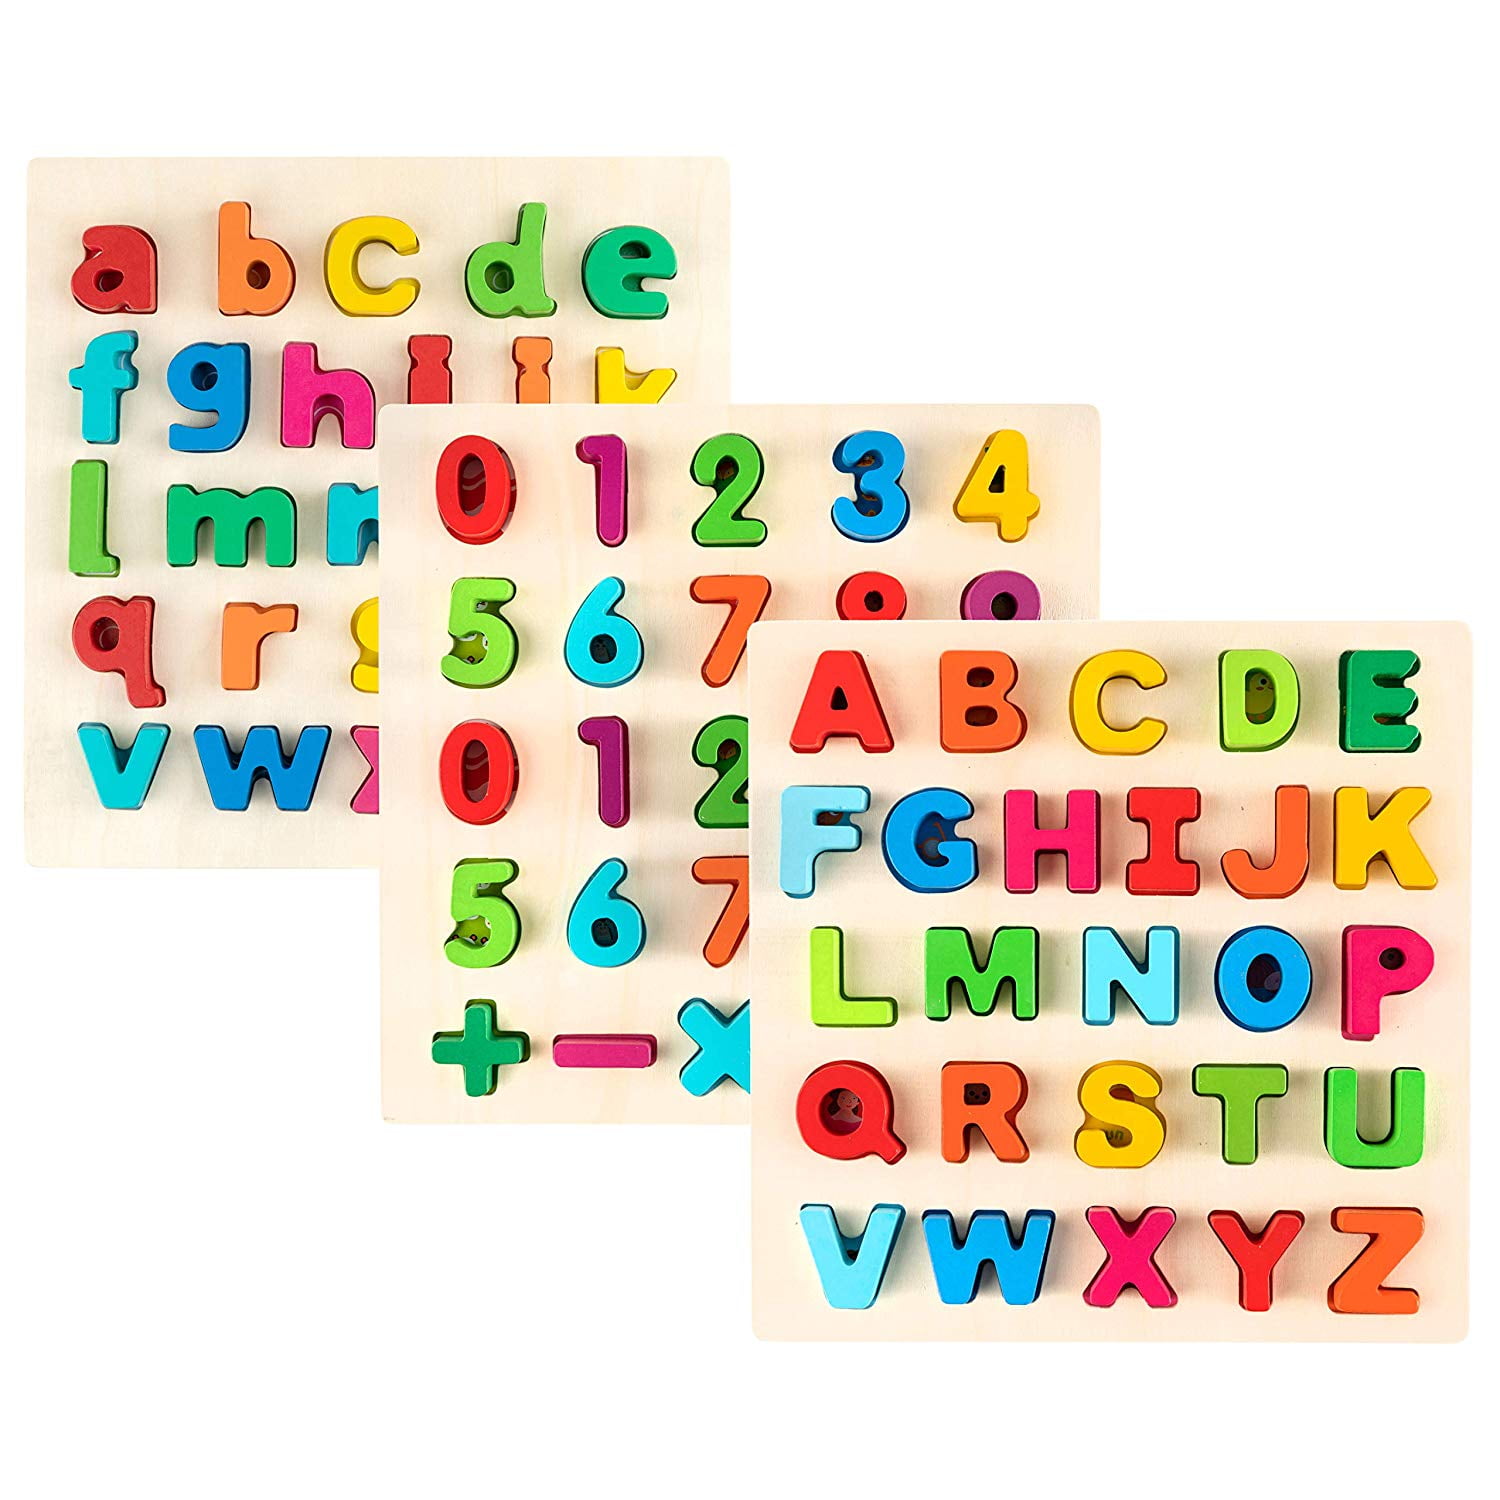 LEARN READ ENGLISH ALPHABET COLOURED Letters Set Wooden Board puzzle 